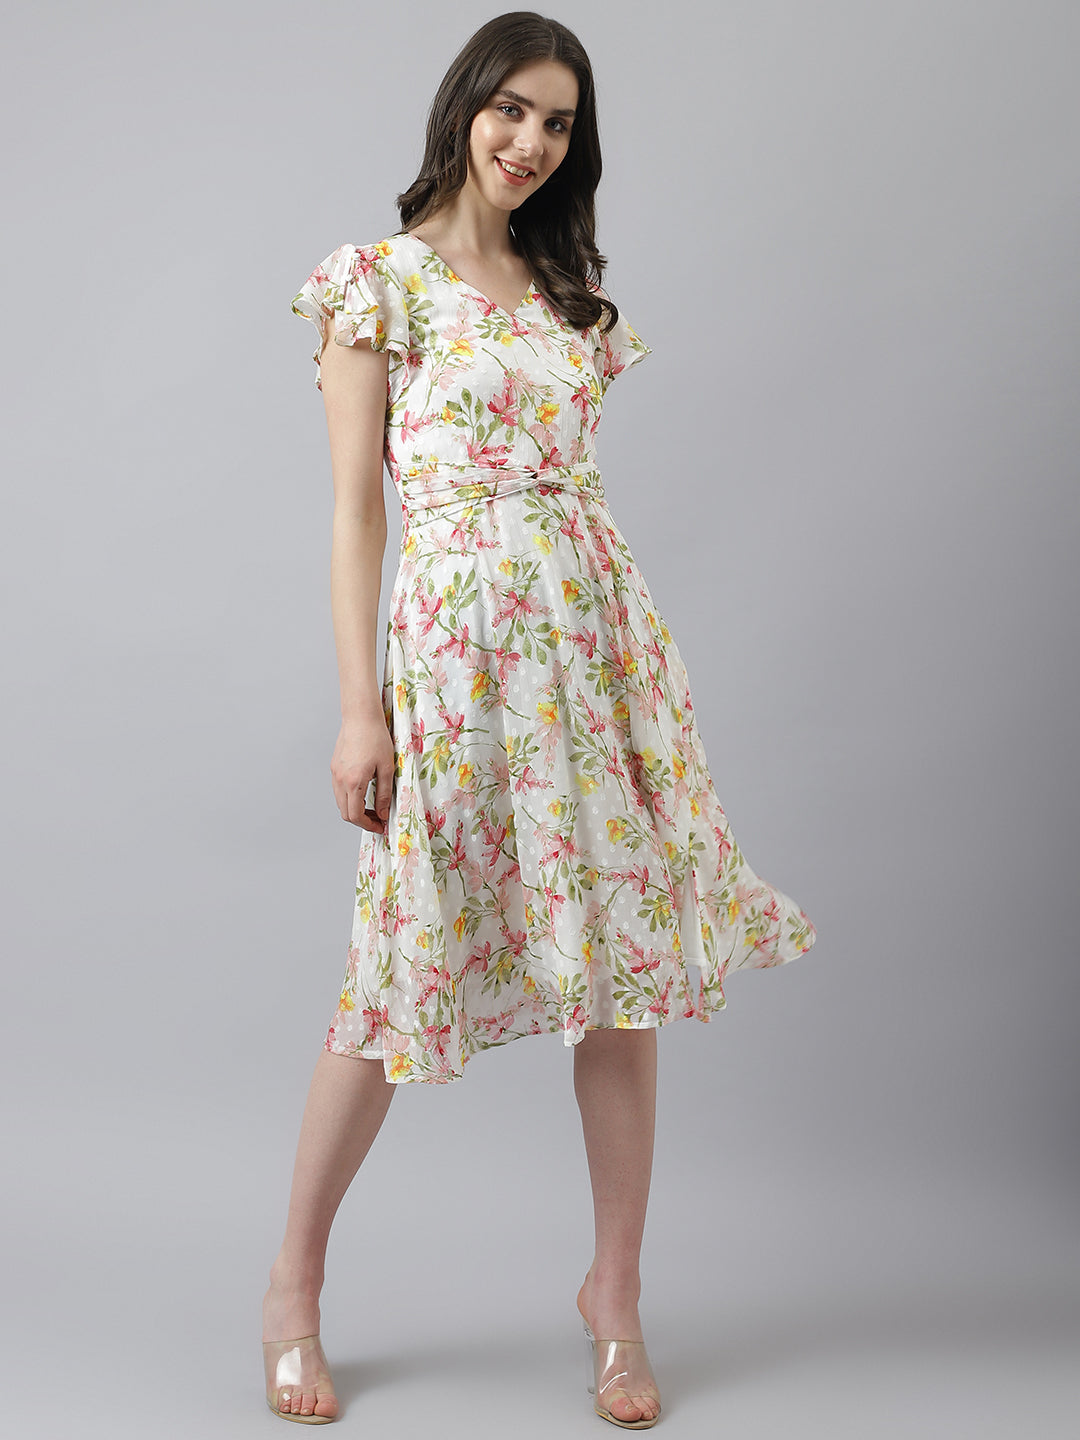 Red Floral Print A-Line Dress With Cap Sleeves with Belt Design